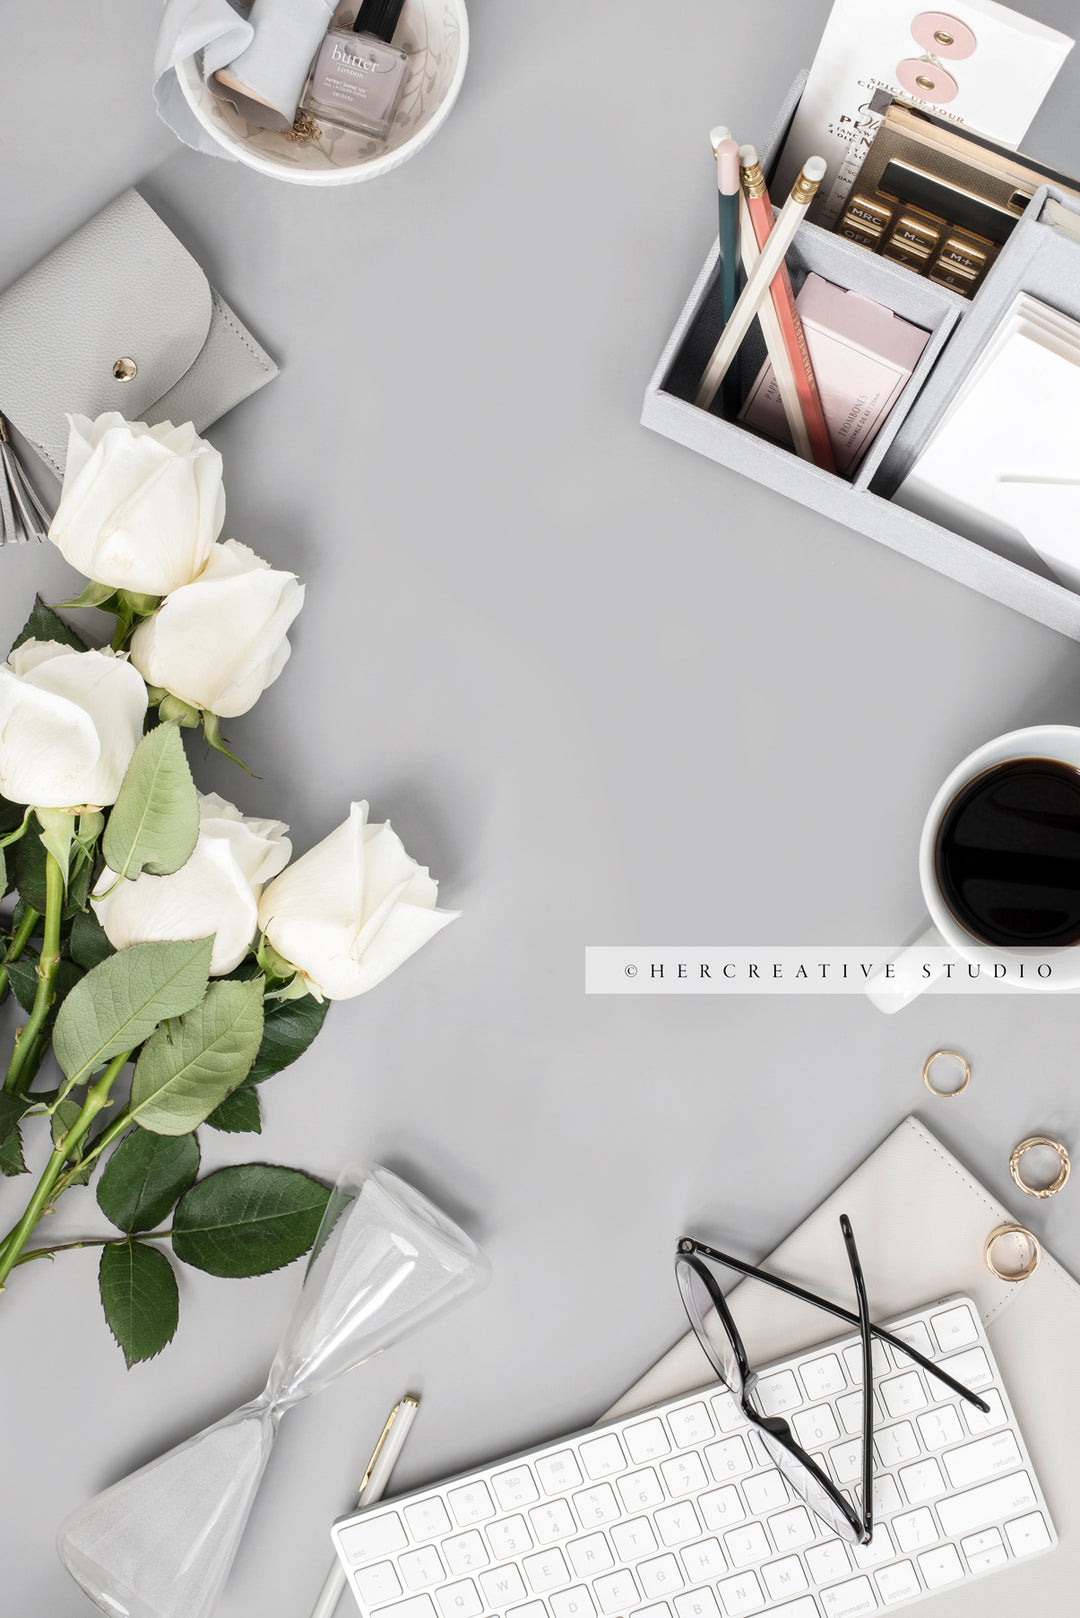 Roses, Hourglass & Coffee on Grey Background. Stock Image